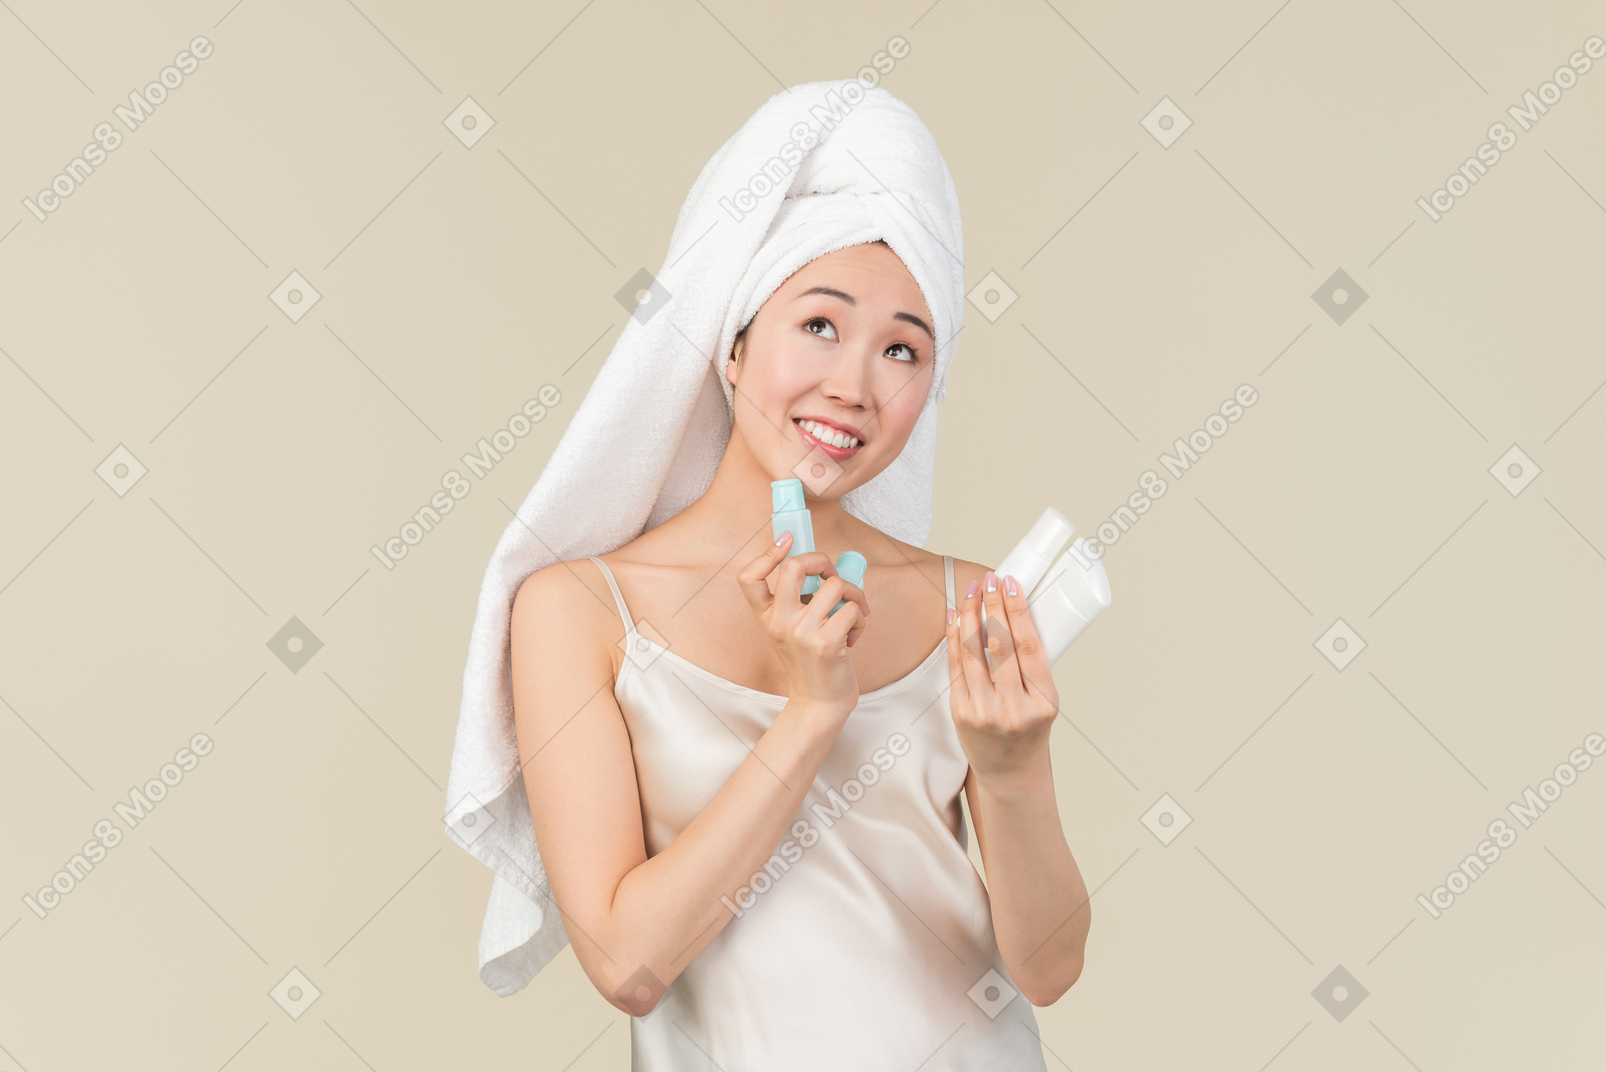 Young asian woman with hair wrapped in towel holding beauty products